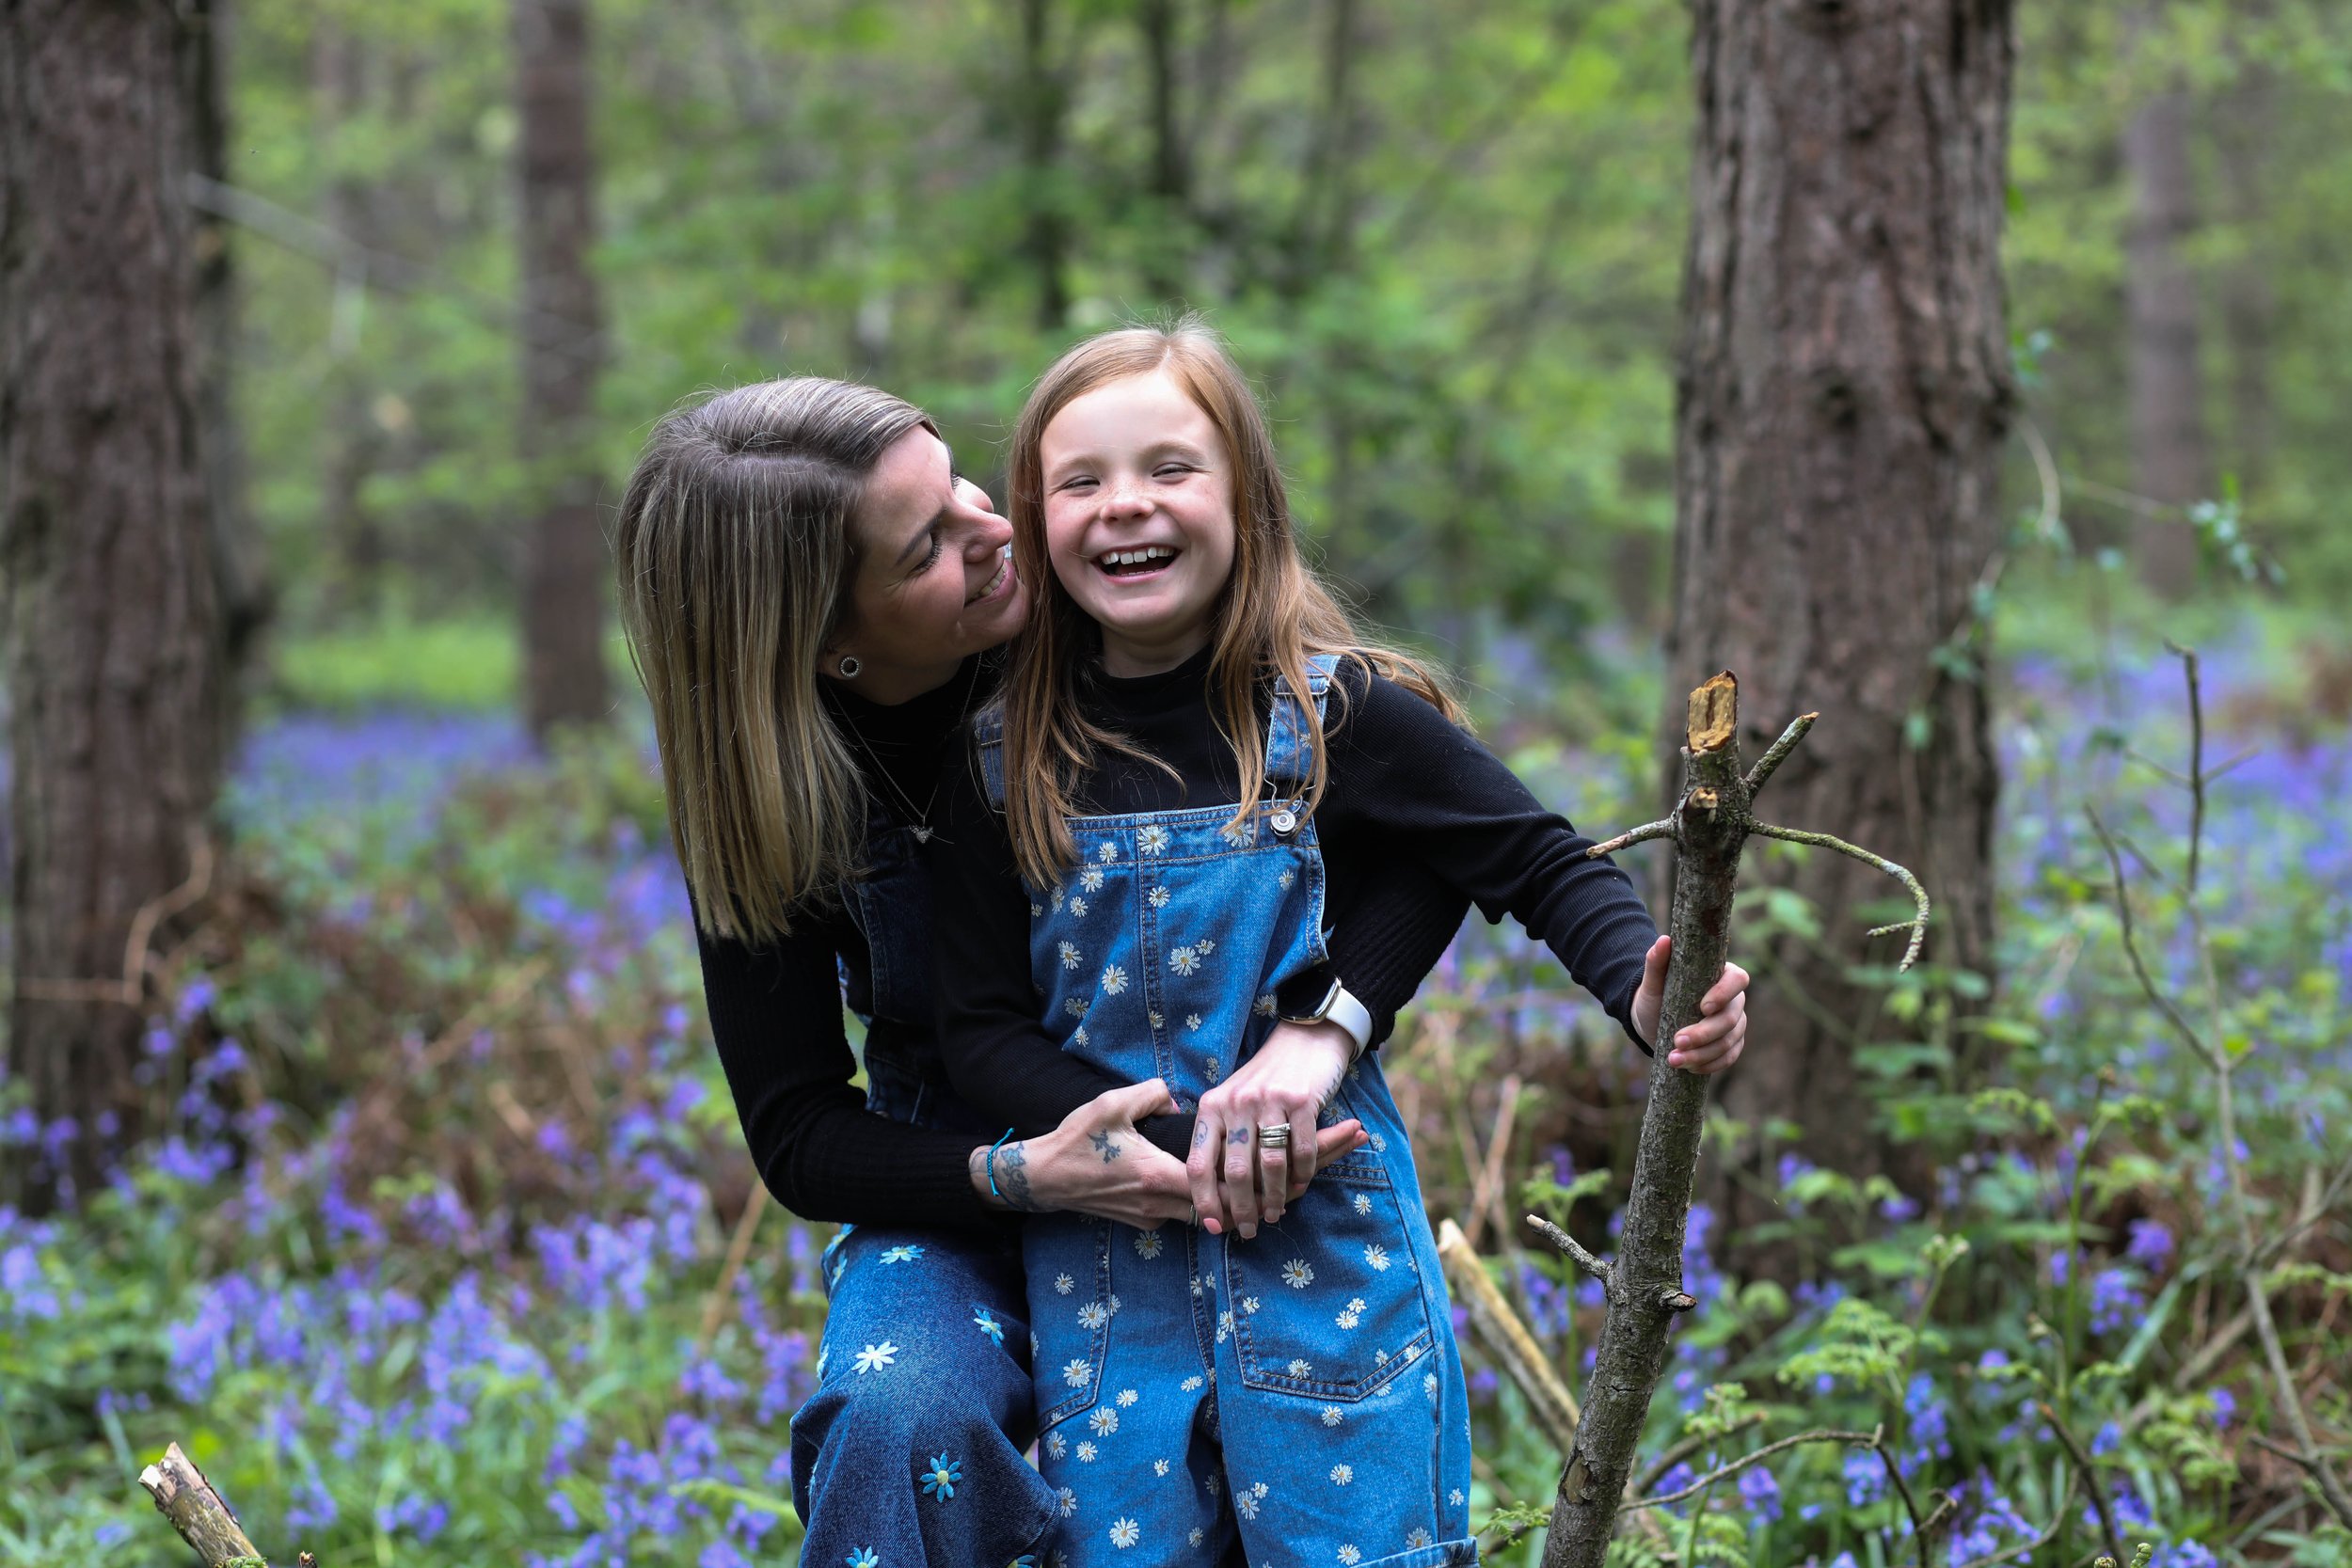 MUM AND DAUGHTER PHOTO SHOOT IN THE BLUEBELLS | BERKSHIRE PORTRAIT SHOOTS28 choice .JPG